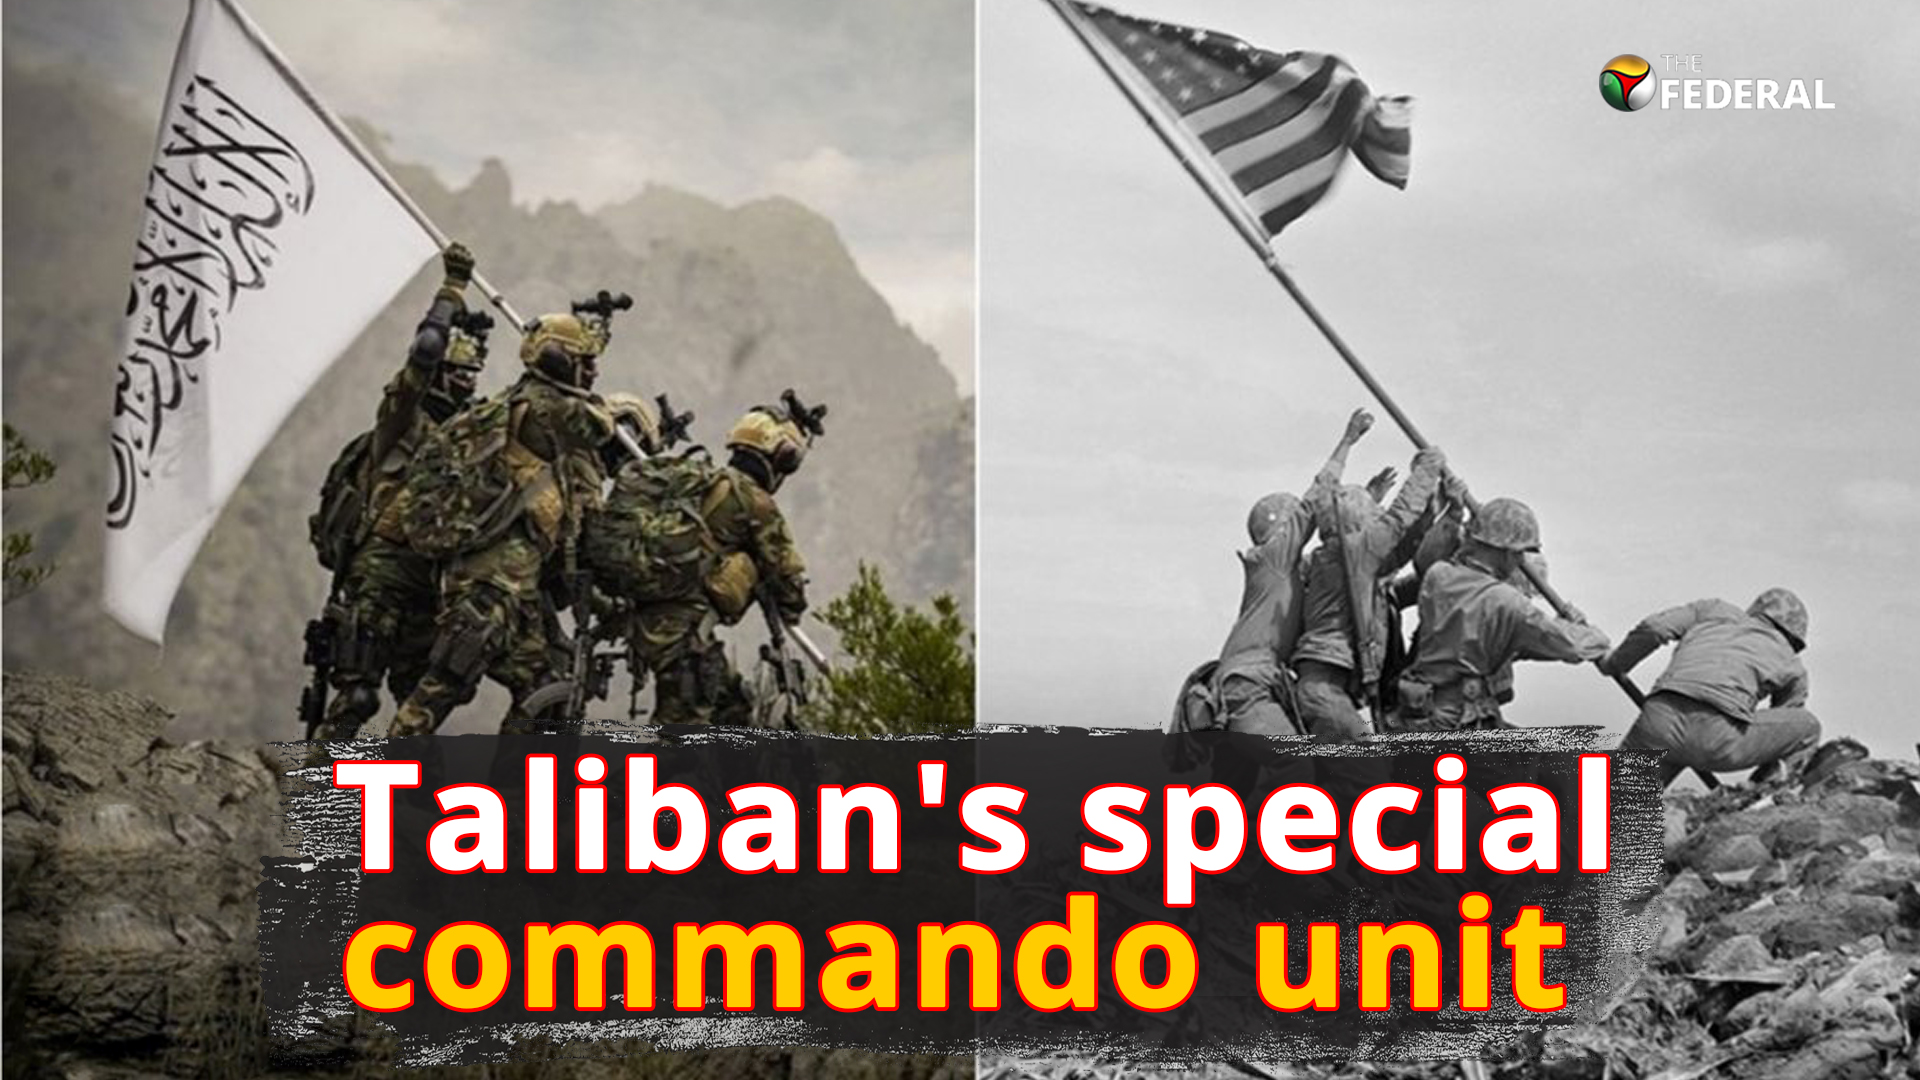 Explained: All you need to know about Talibans elite commando unit ‘Badri 313’